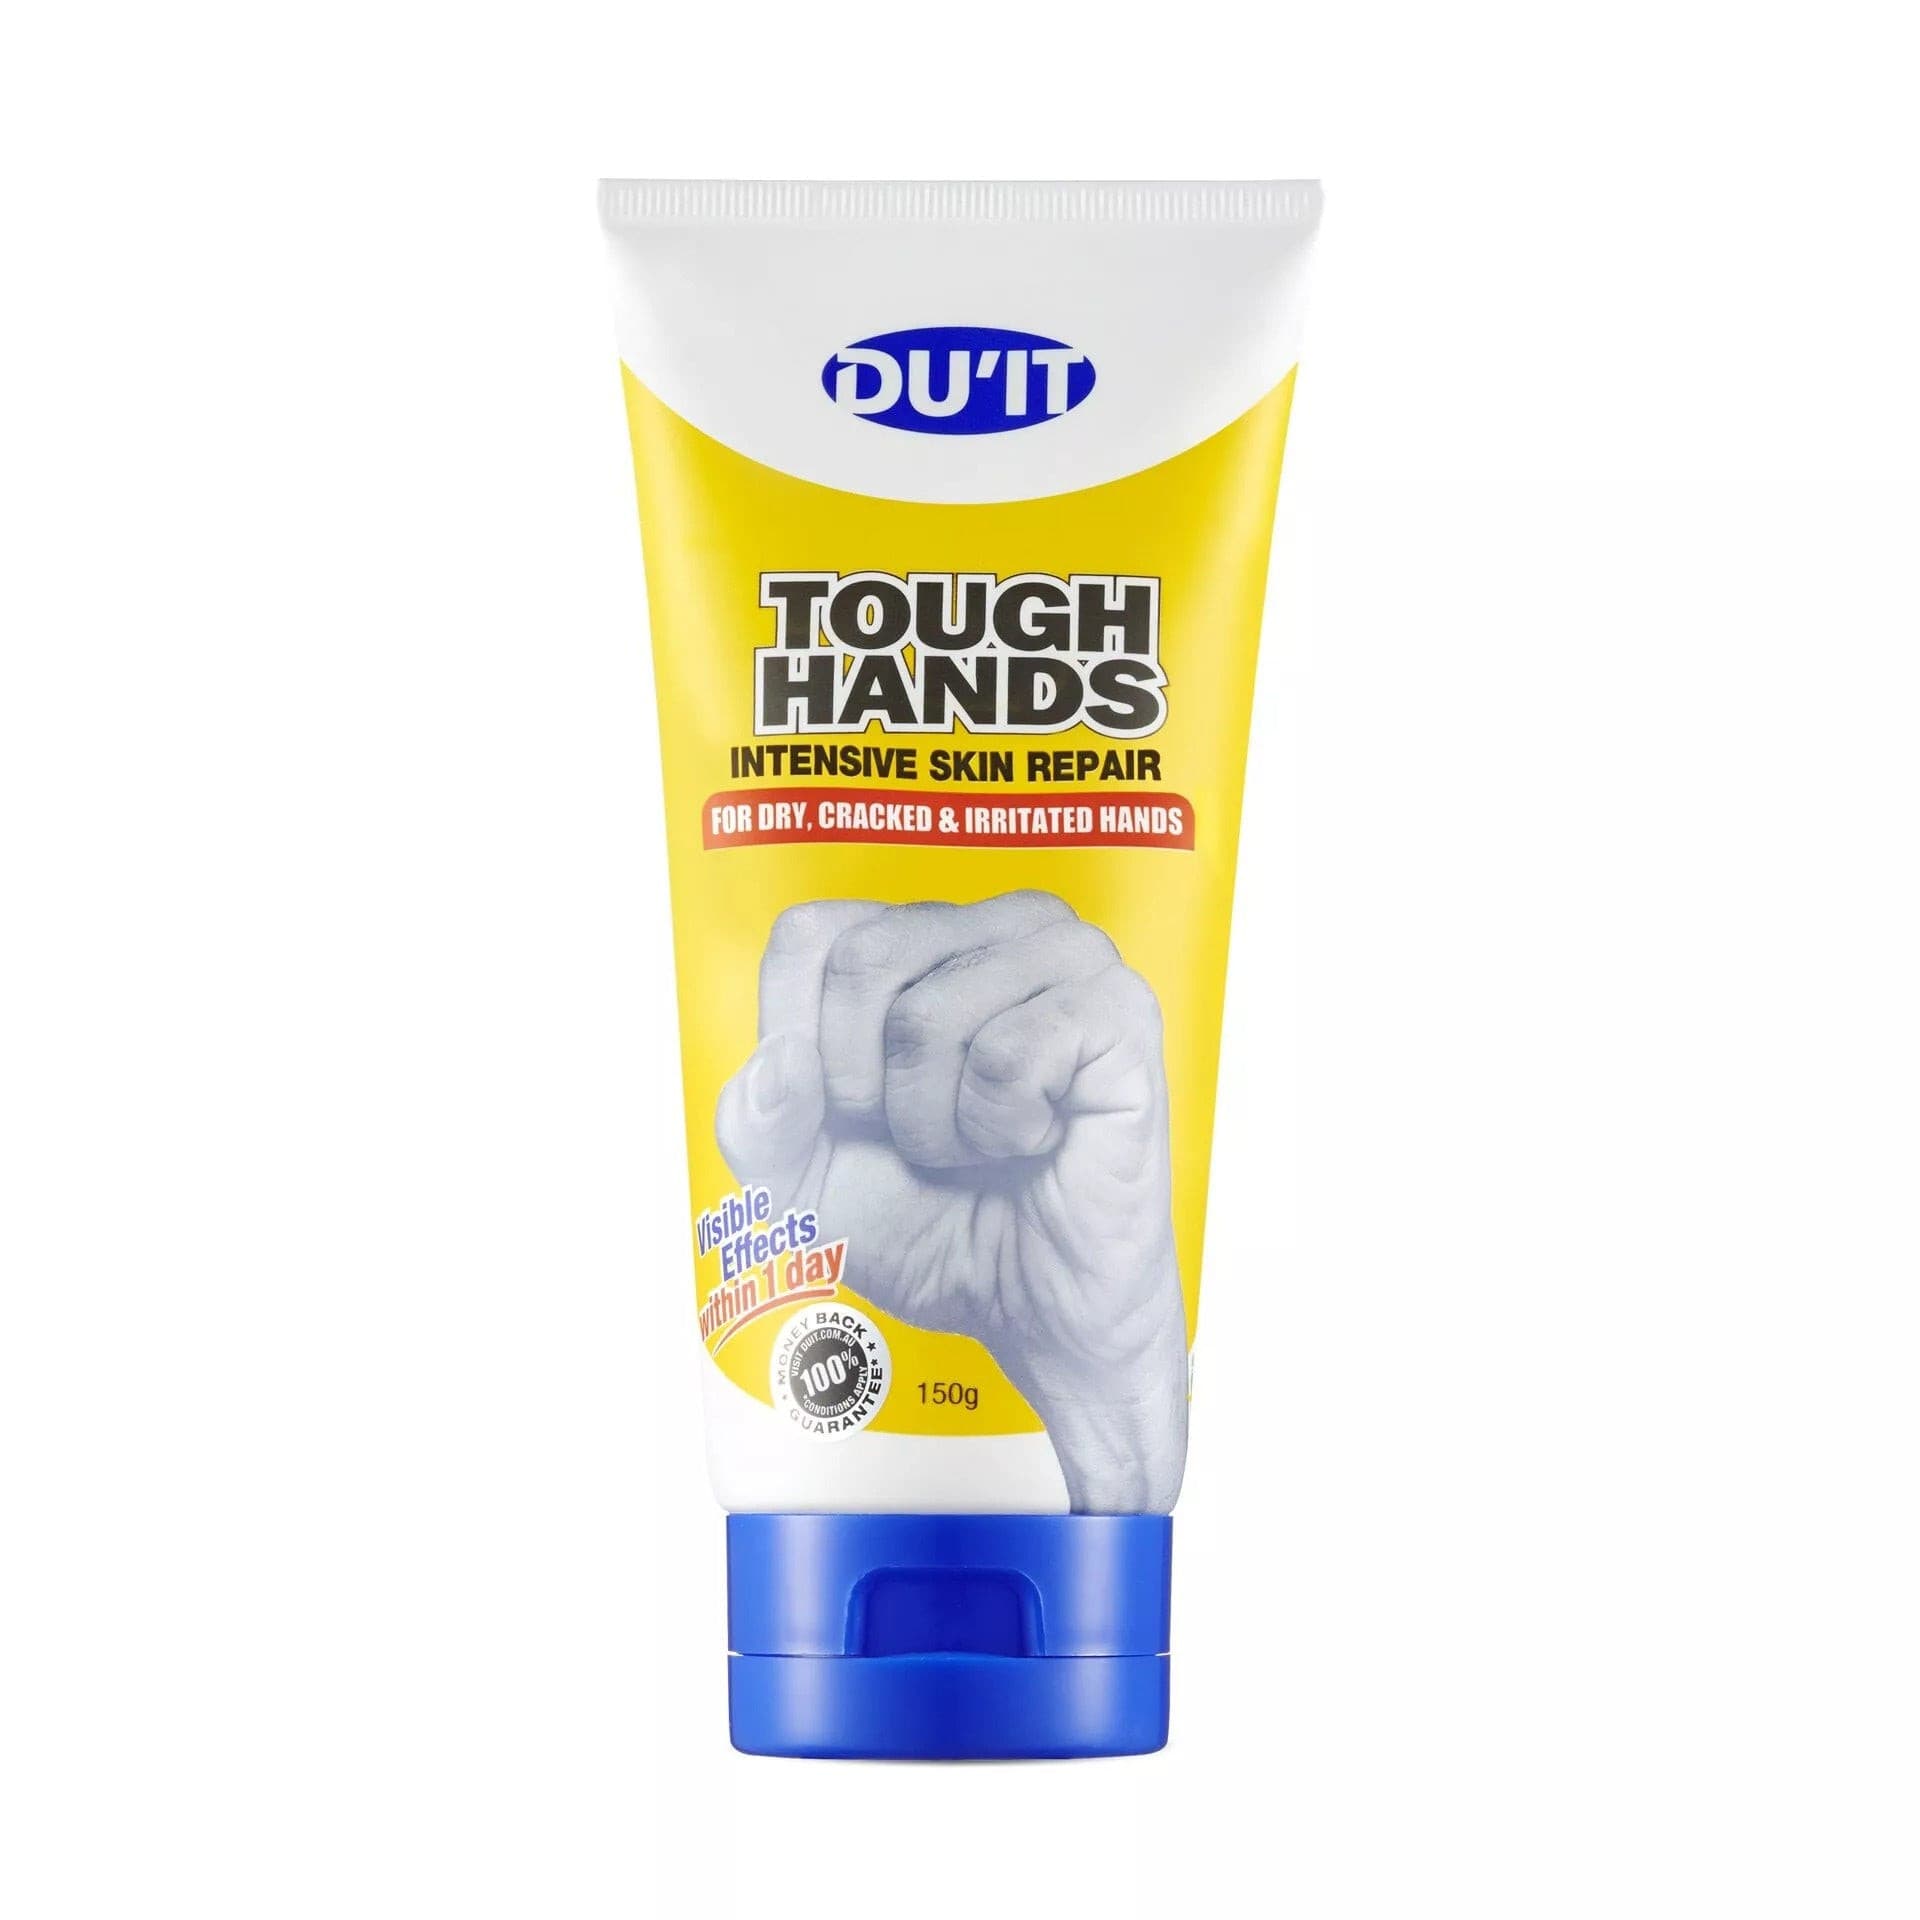 DU’IT Tough HandsRepairs dry, rough, cracked, irritated and calloused hands, with visible effects in 1 day. It’s non-greasy, made in Australia and contains no nasties.